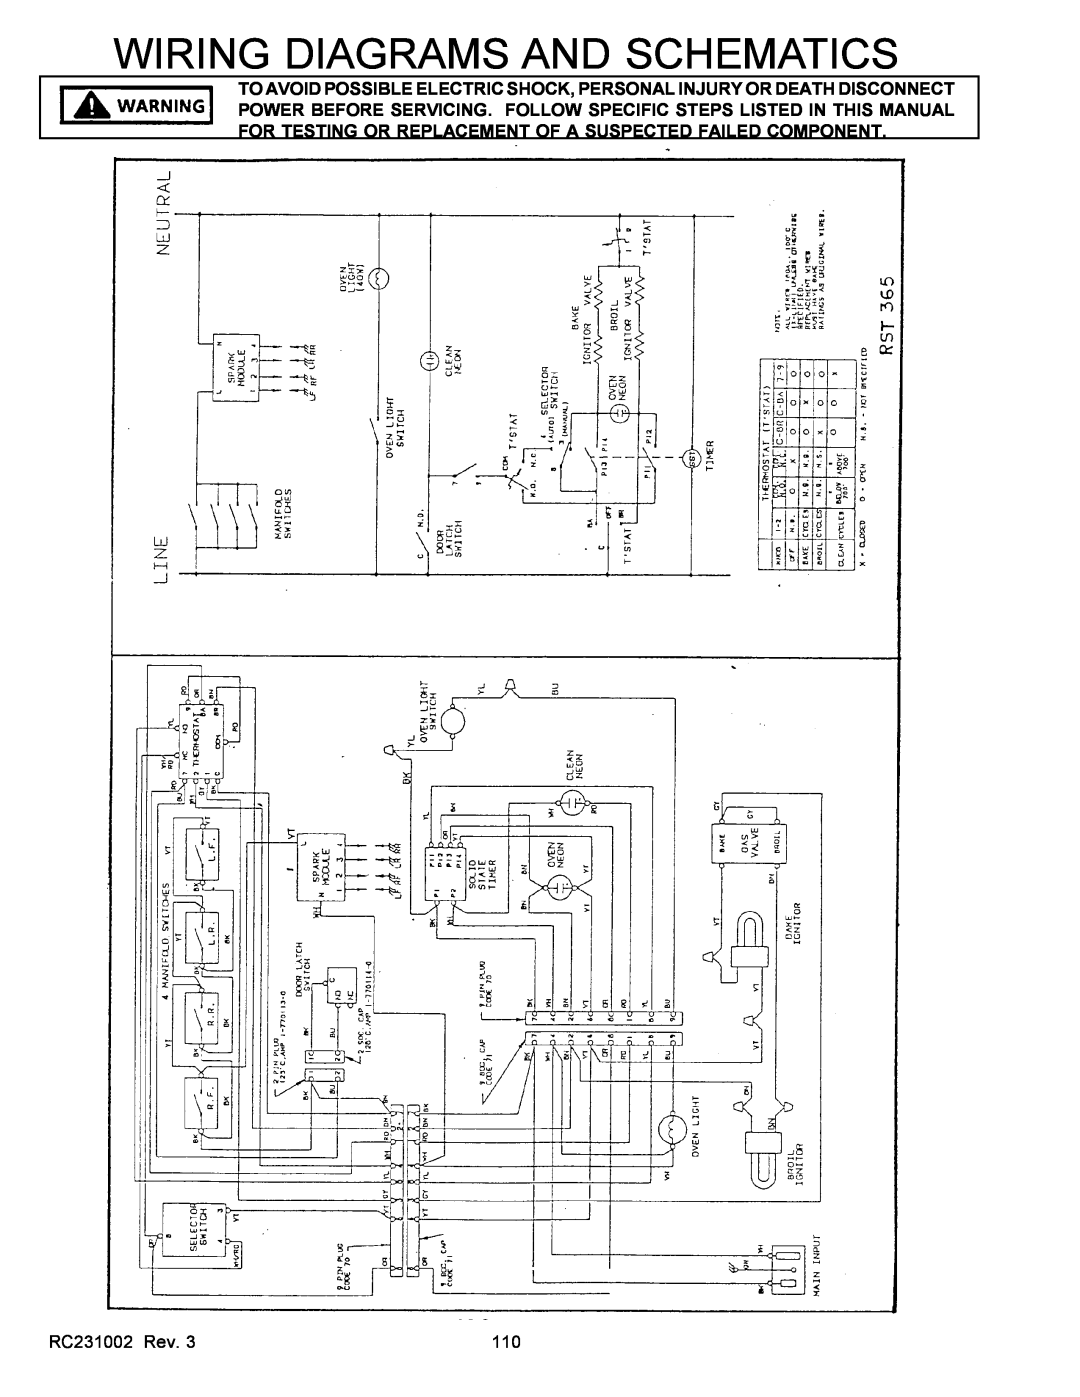 Amana RST, RSS service manual Wiring Diagrams And Schematics, RC231002 Rev 